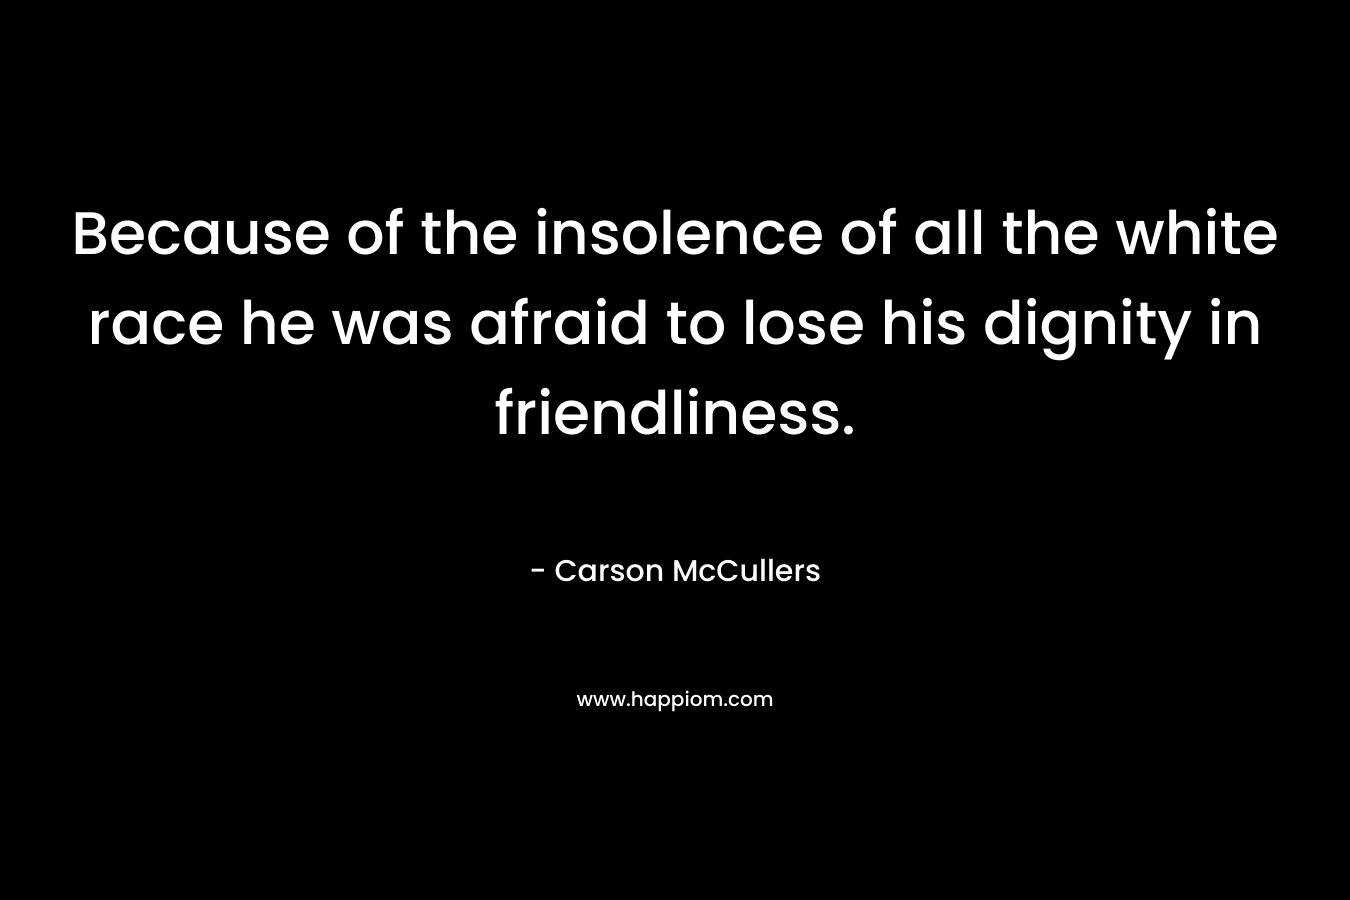 Because of the insolence of all the white race he was afraid to lose his dignity in friendliness. – Carson McCullers